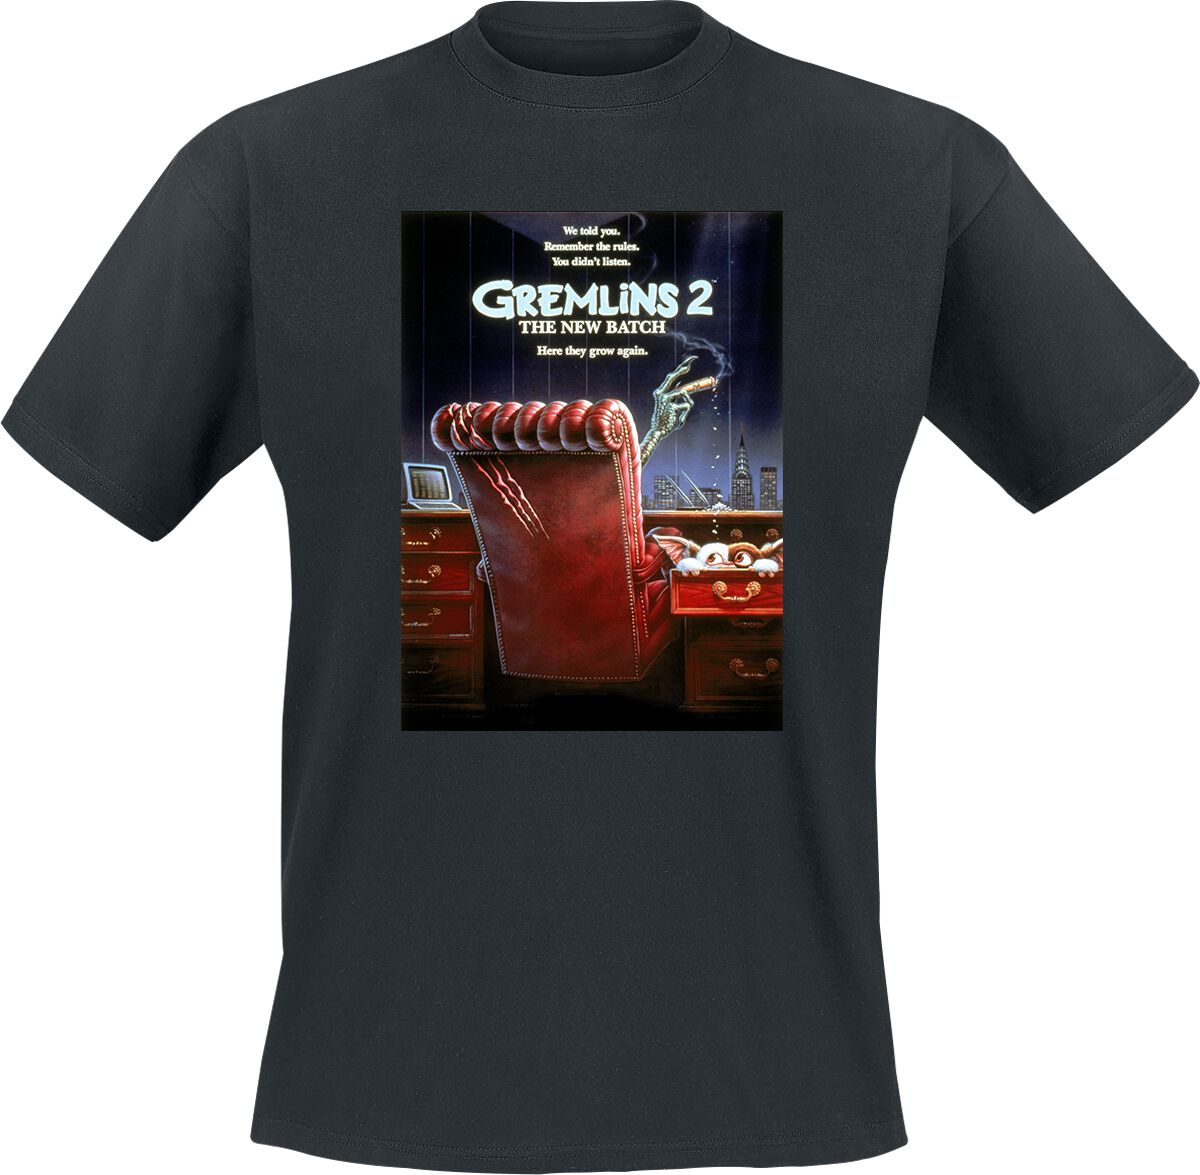 Gremlins 2 - The New Batch T-Shirt black product